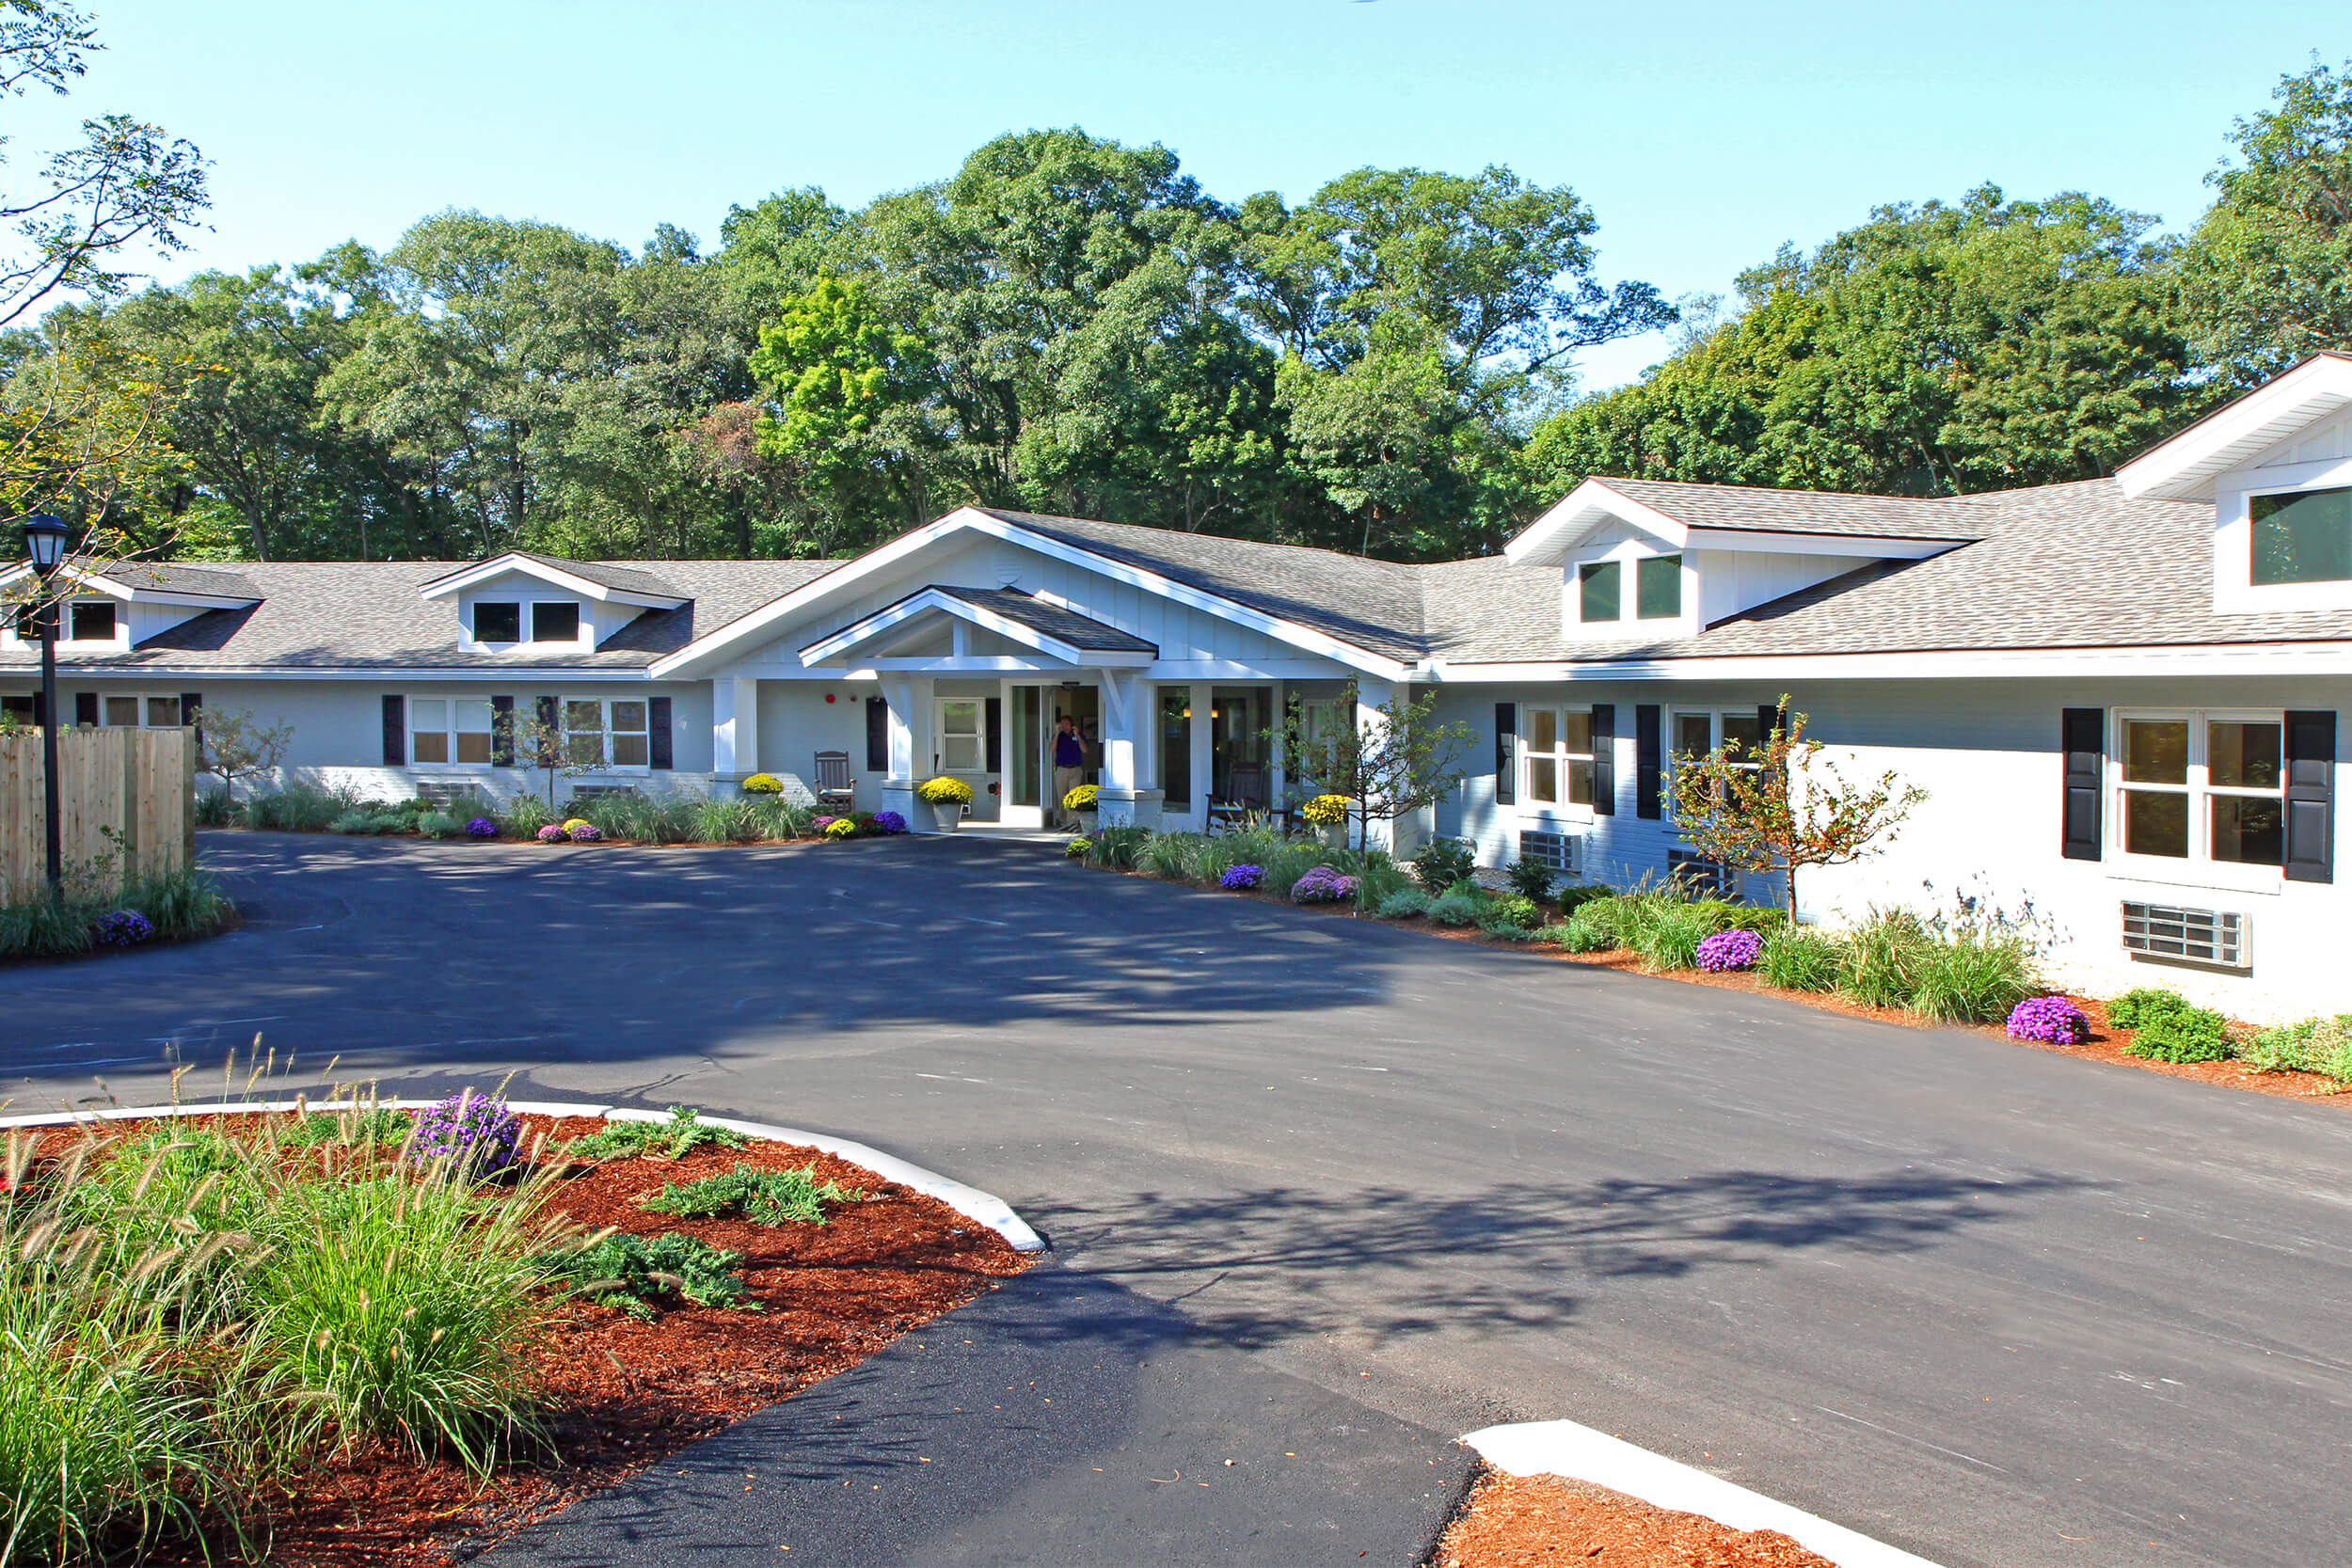 Exterior daytime view of entrance to a senior living facility. THe building is low and long, featuring white siding with black window shutters. Low bushes and plants are in the mulch along the front edge of the building, and a circular driveway area is seen in the front.